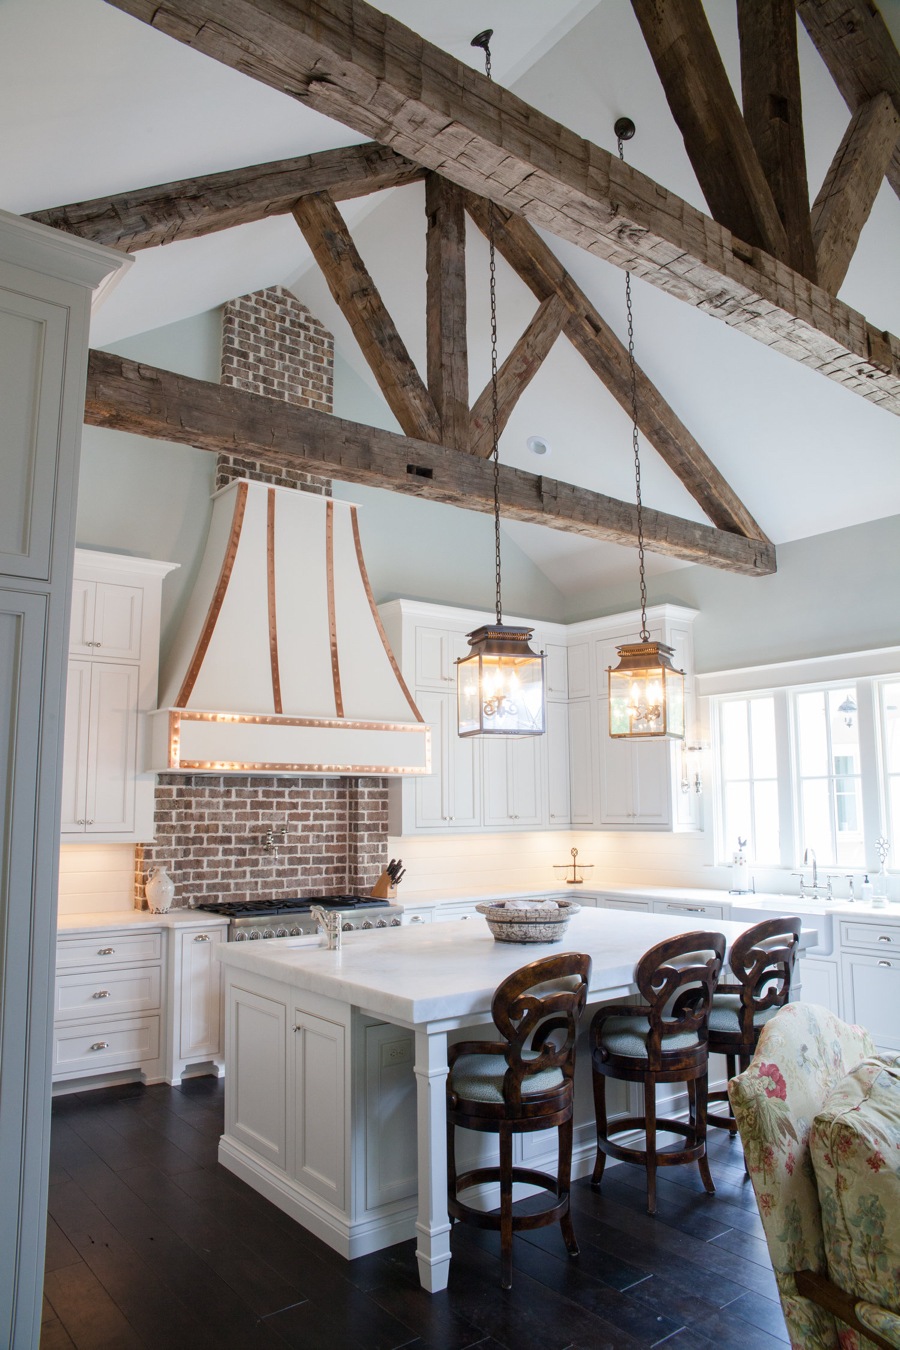 Vaulted Ceiling & White Classic Kitchen Island